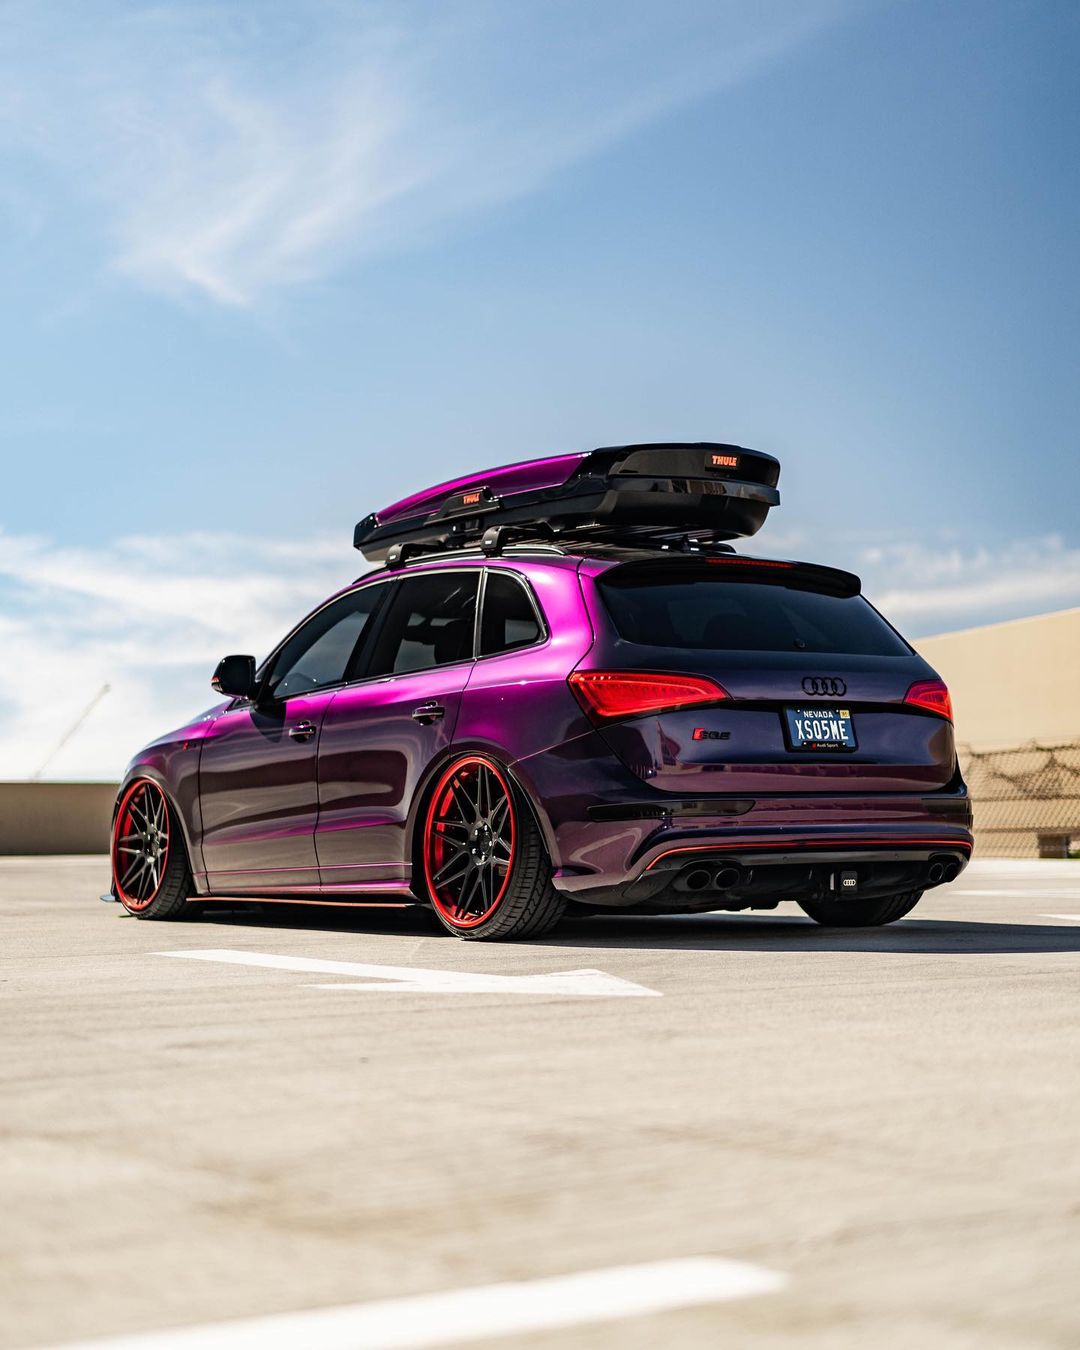 Audi SQ5 Quattro with a roof rack